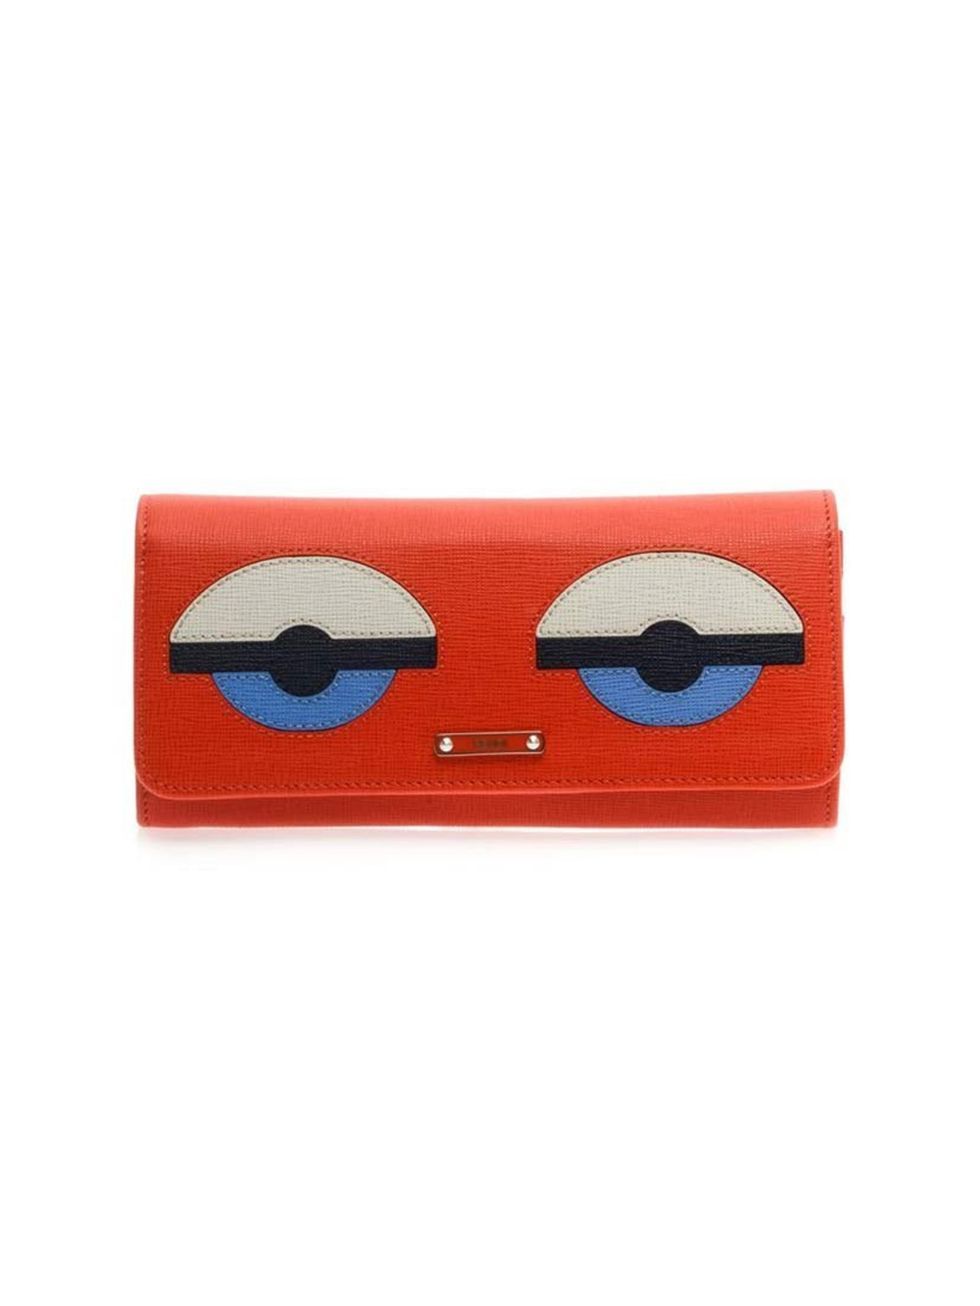 <p>Fendi's latest accessories collection has us buggin' (that's a good thing).</p><p>Fendi wallet, £430 at <a href="http://www.matchesfashion.com/product/175474">MatchesFashion.com</a></p>